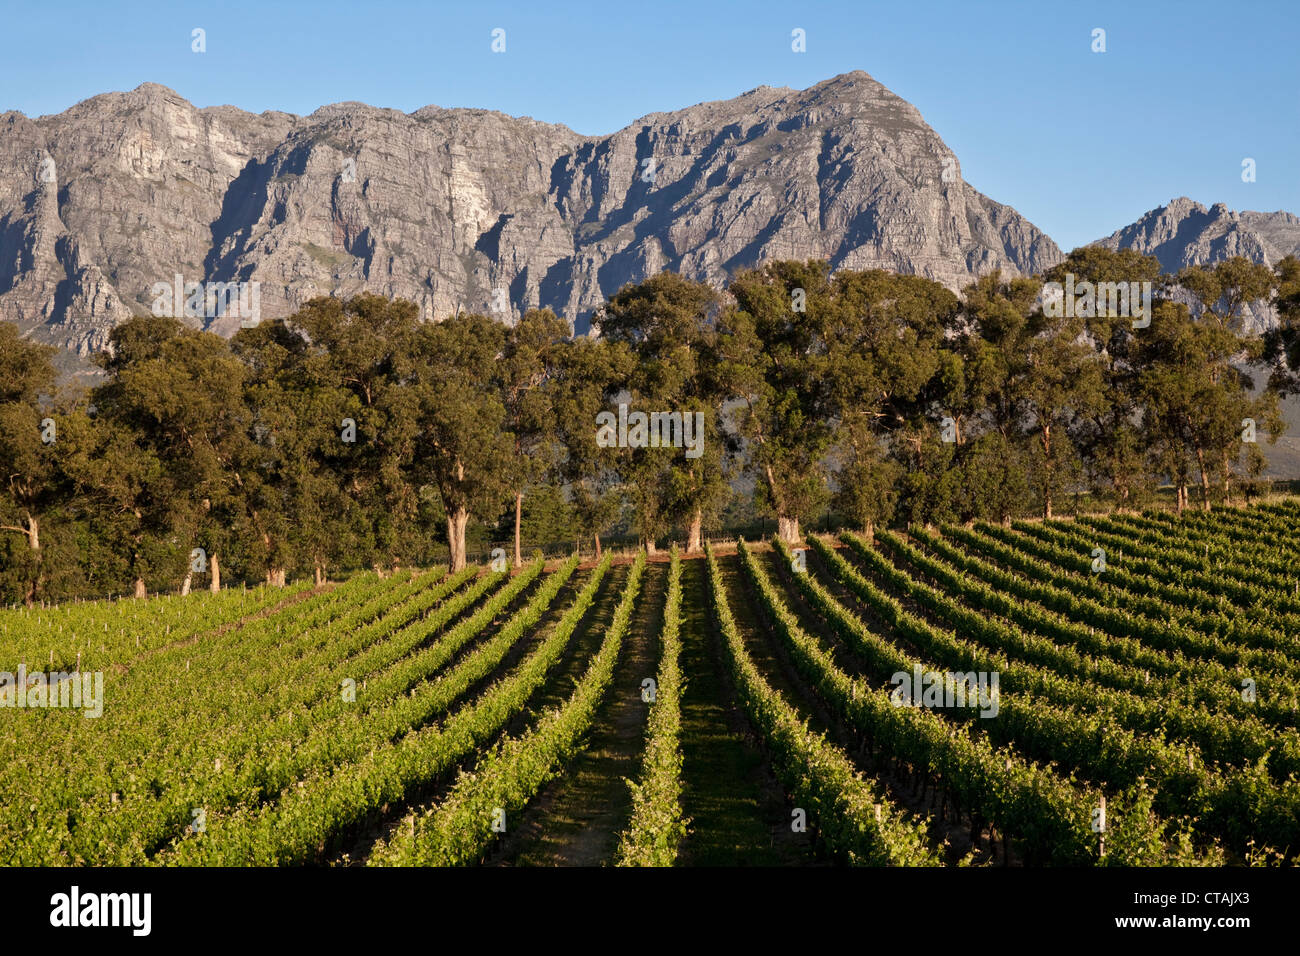 View onto the vineyards of Thelema Mountain Vineyards Winery with Mountain Range Groot Drakenstein, Stellenbosch, Western Cape, Stock Photo